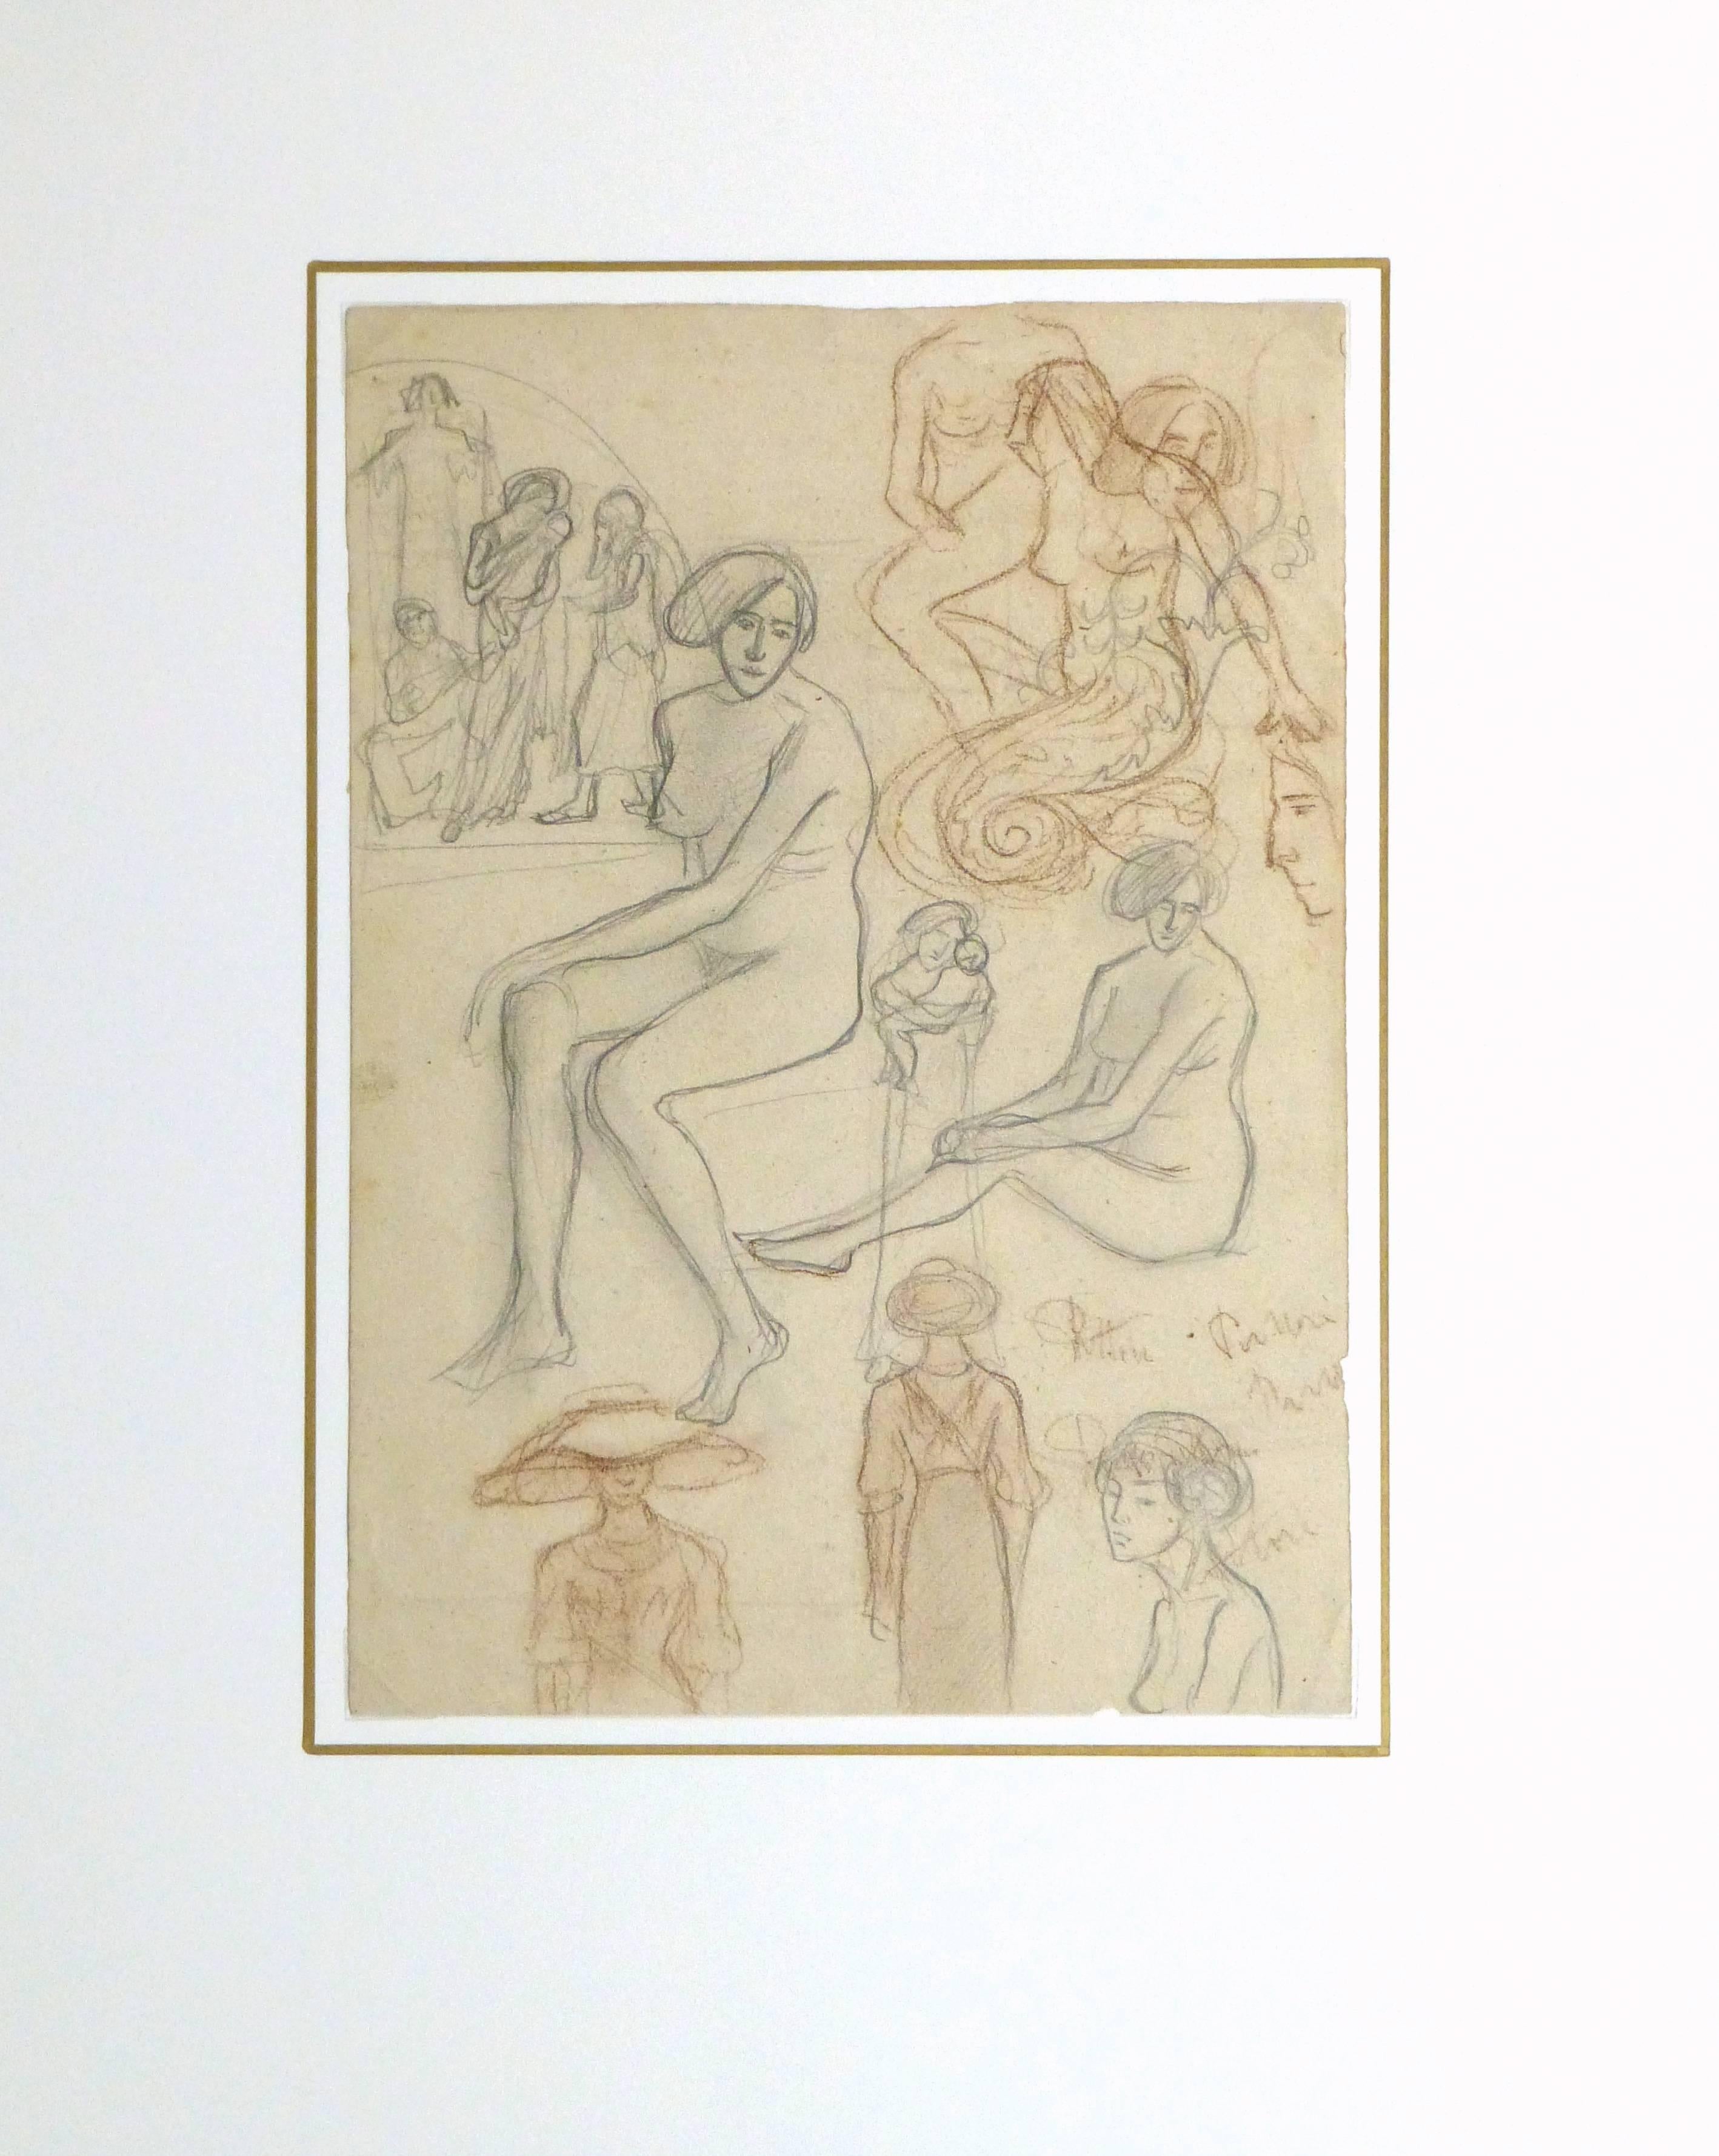 Elegant Italian pencil and charcoal sketch of various female figures both clothed and nude by Fantini, circa 1900.

Original artwork on paper displayed on a white mat with a gold border. Mat fits a standard-size frame. Archival plastic sleeve and